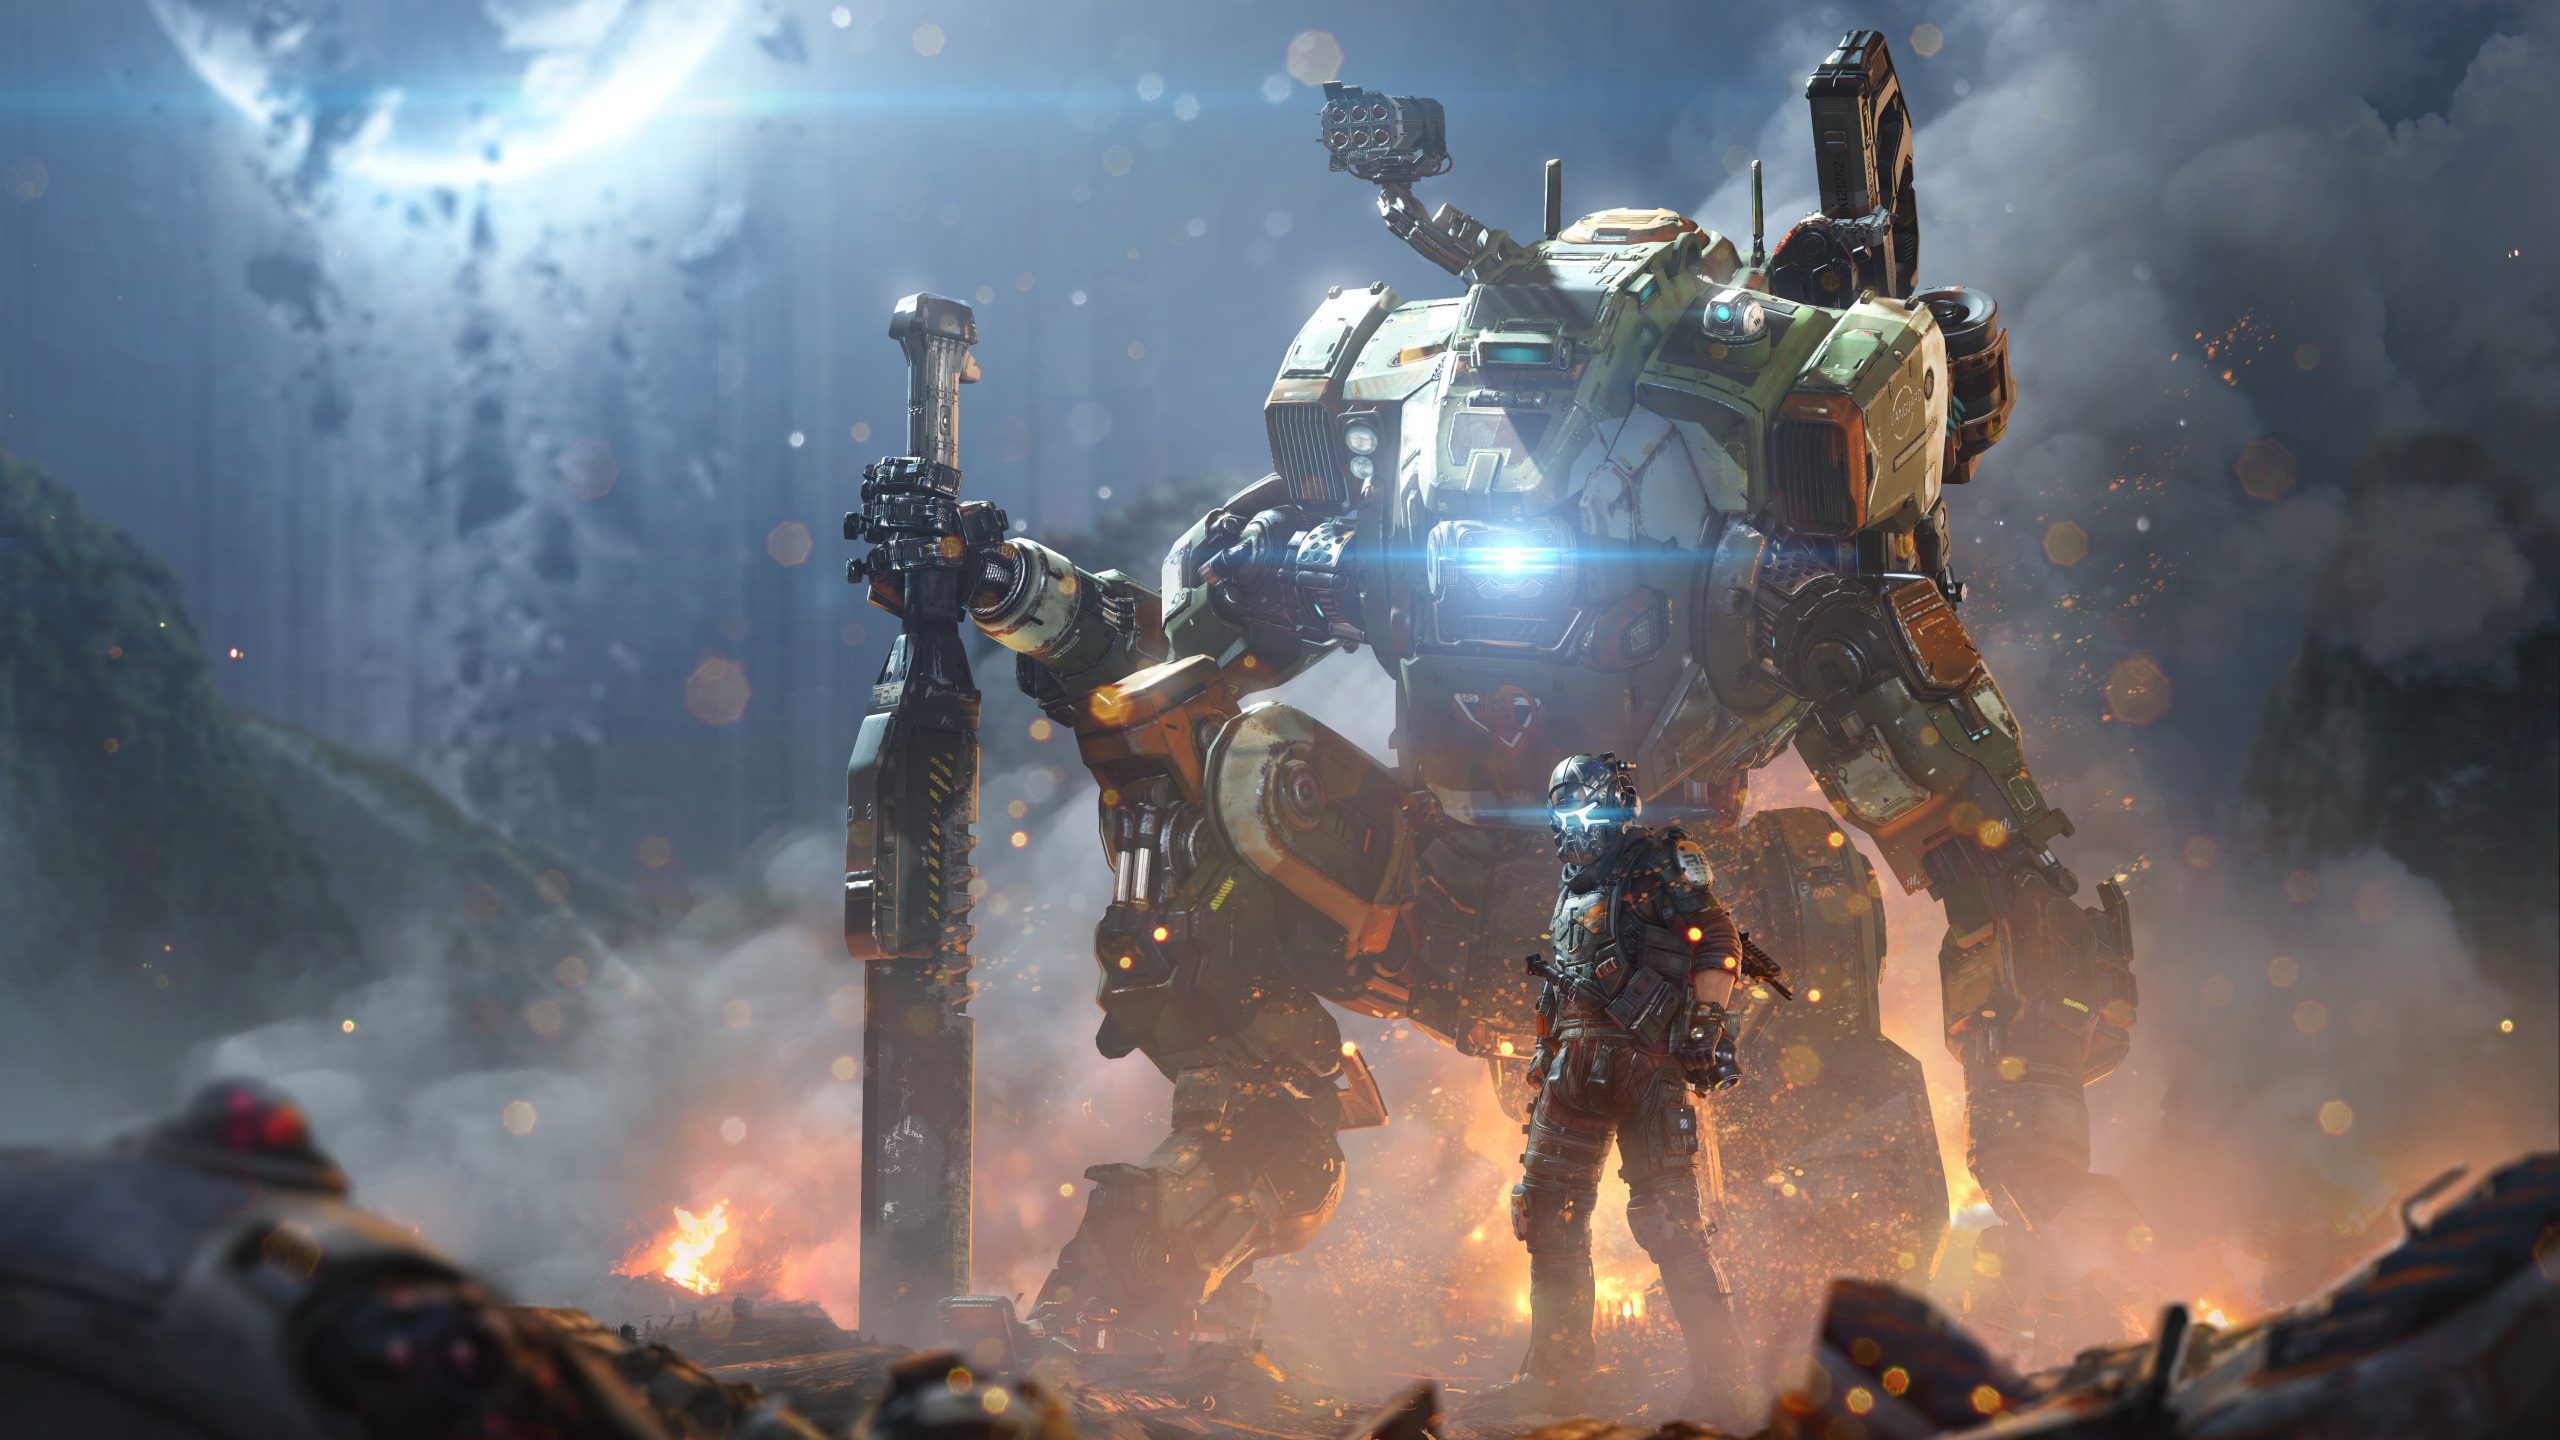 Titanfall 2's peak players surge to above 20,000 after a sudden update. Photo from hdqwalls.com